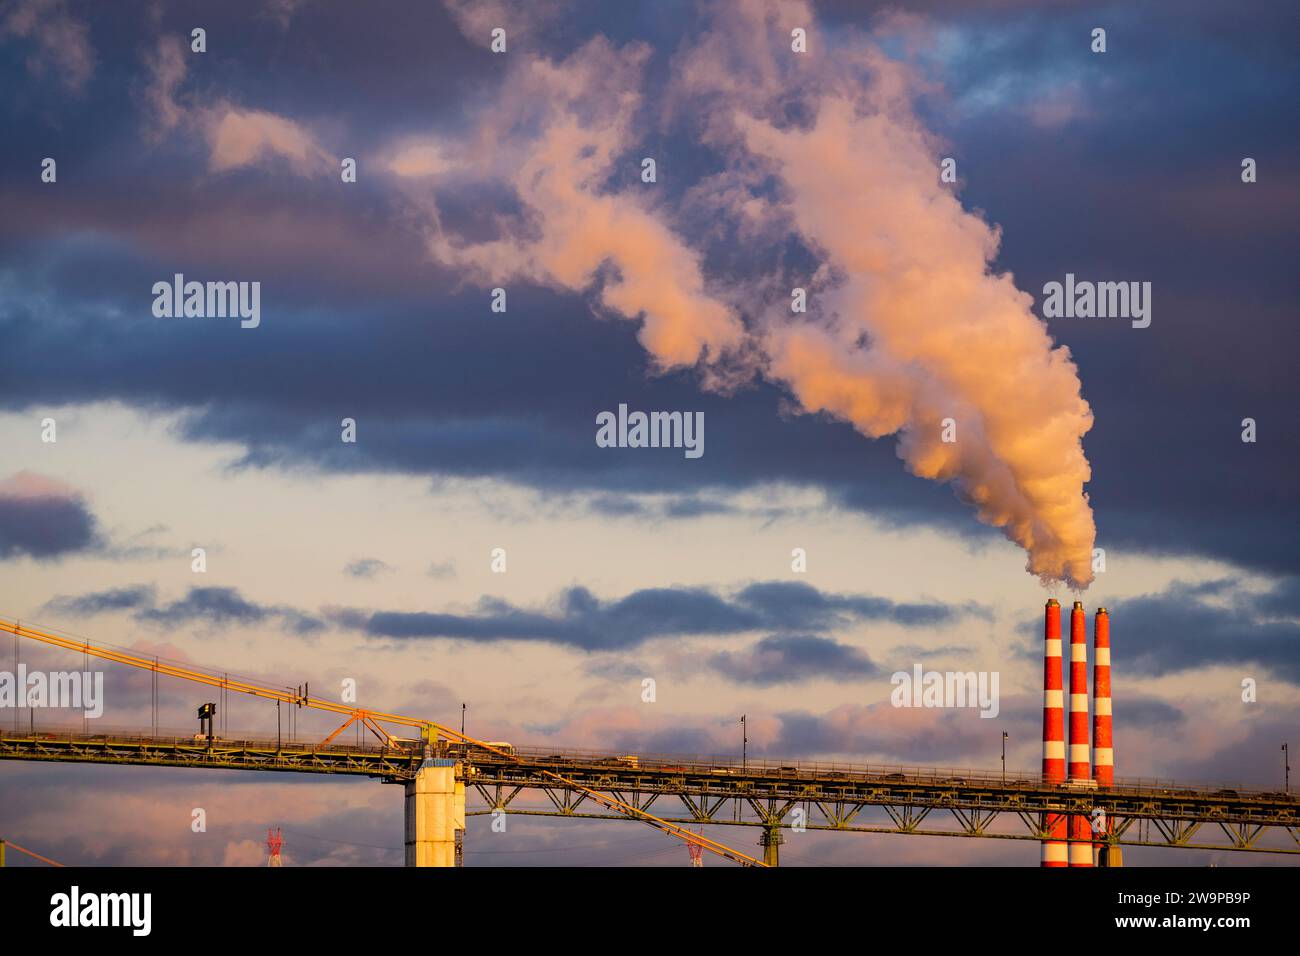 A large plume emitting to the sky from three smoke stacks. Stock Photo